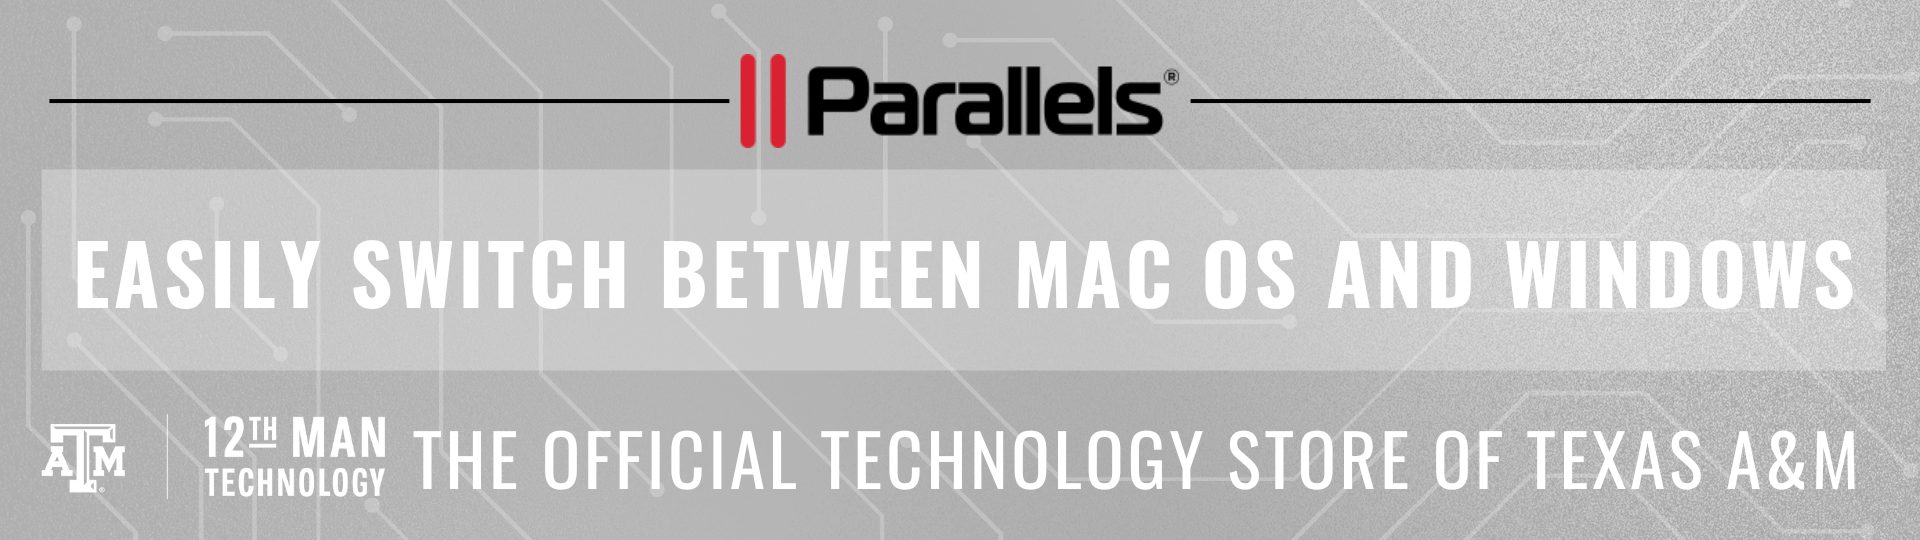 Parallels Windows and Mac OS - Texas A&M University - 12th Man Technology